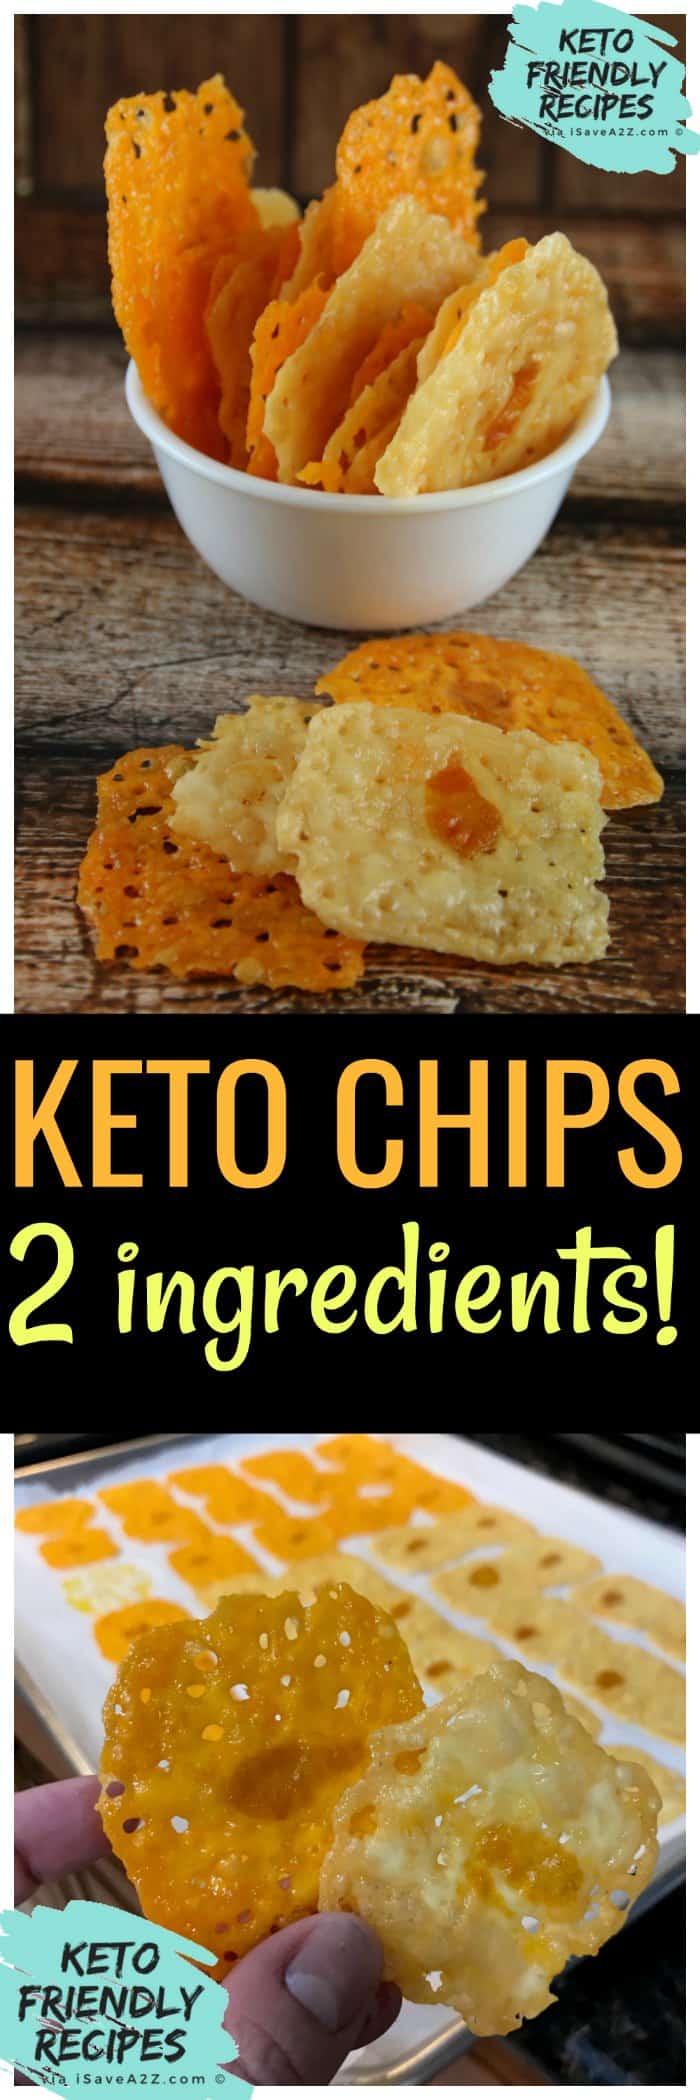 Lazy Keto Chips Recipe made with only 2 ingredients!